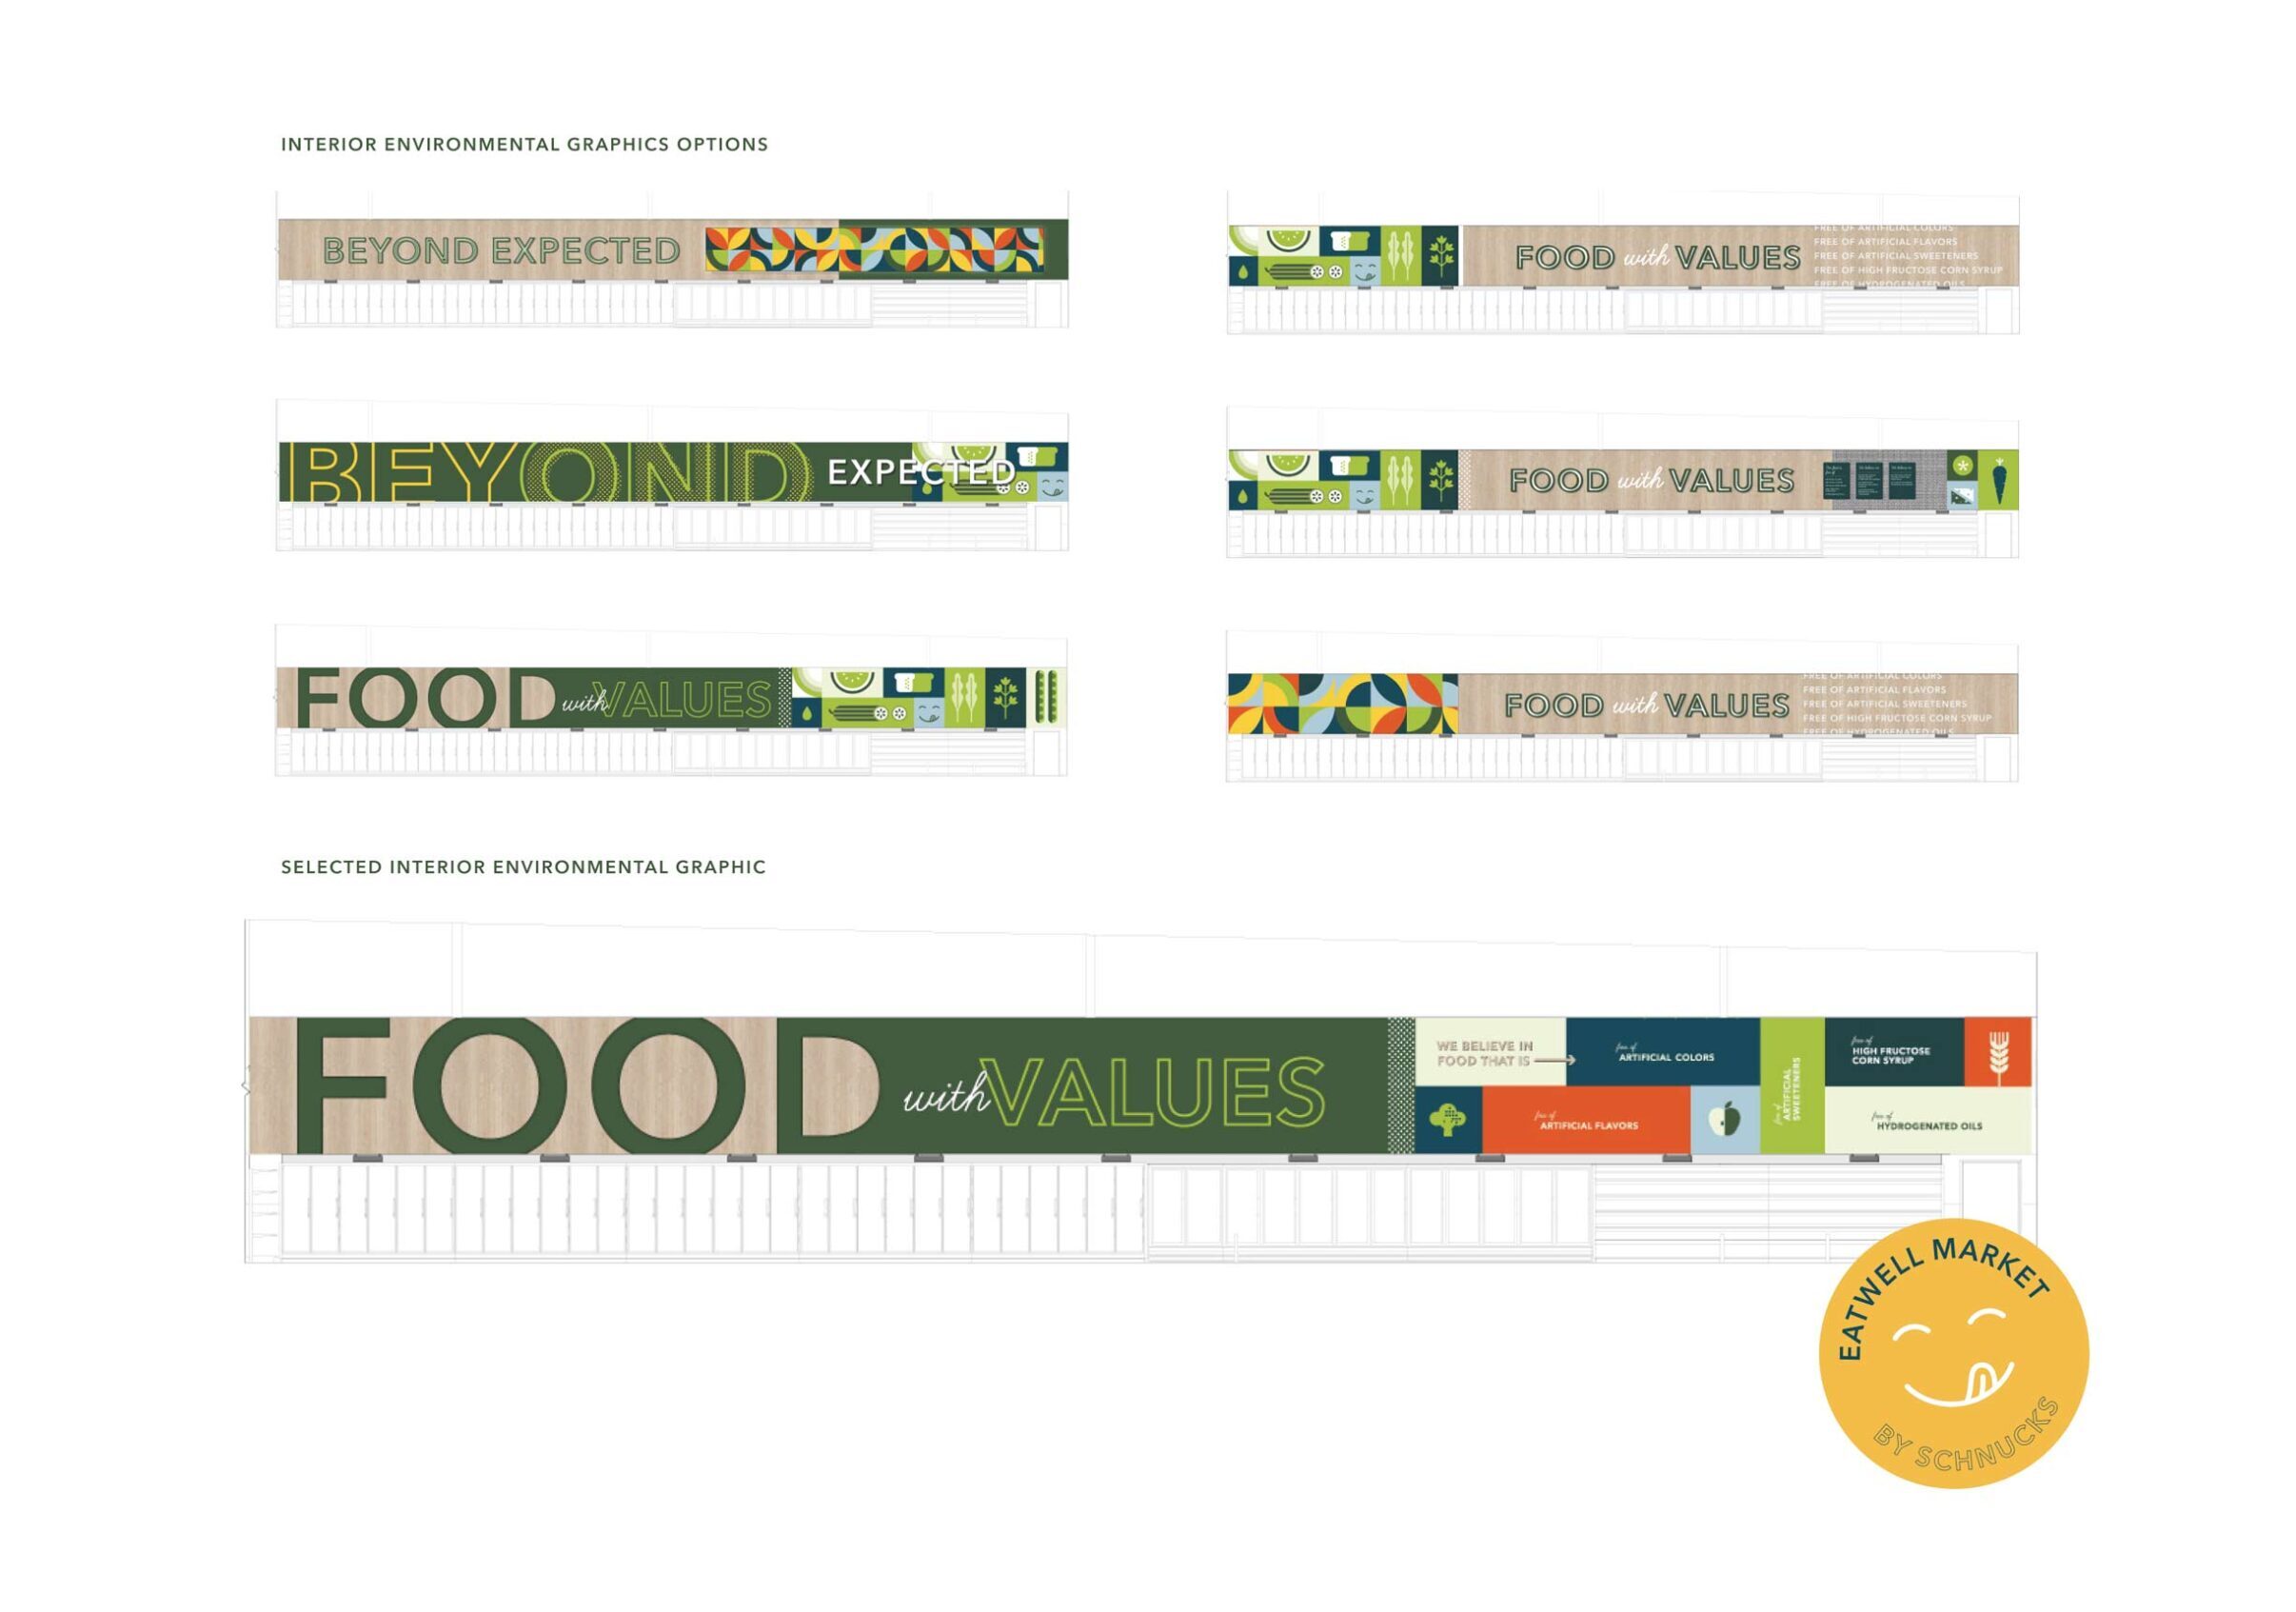 Mockups and the approved version of the Eatwell grocery store environmental graphics above the freezer section